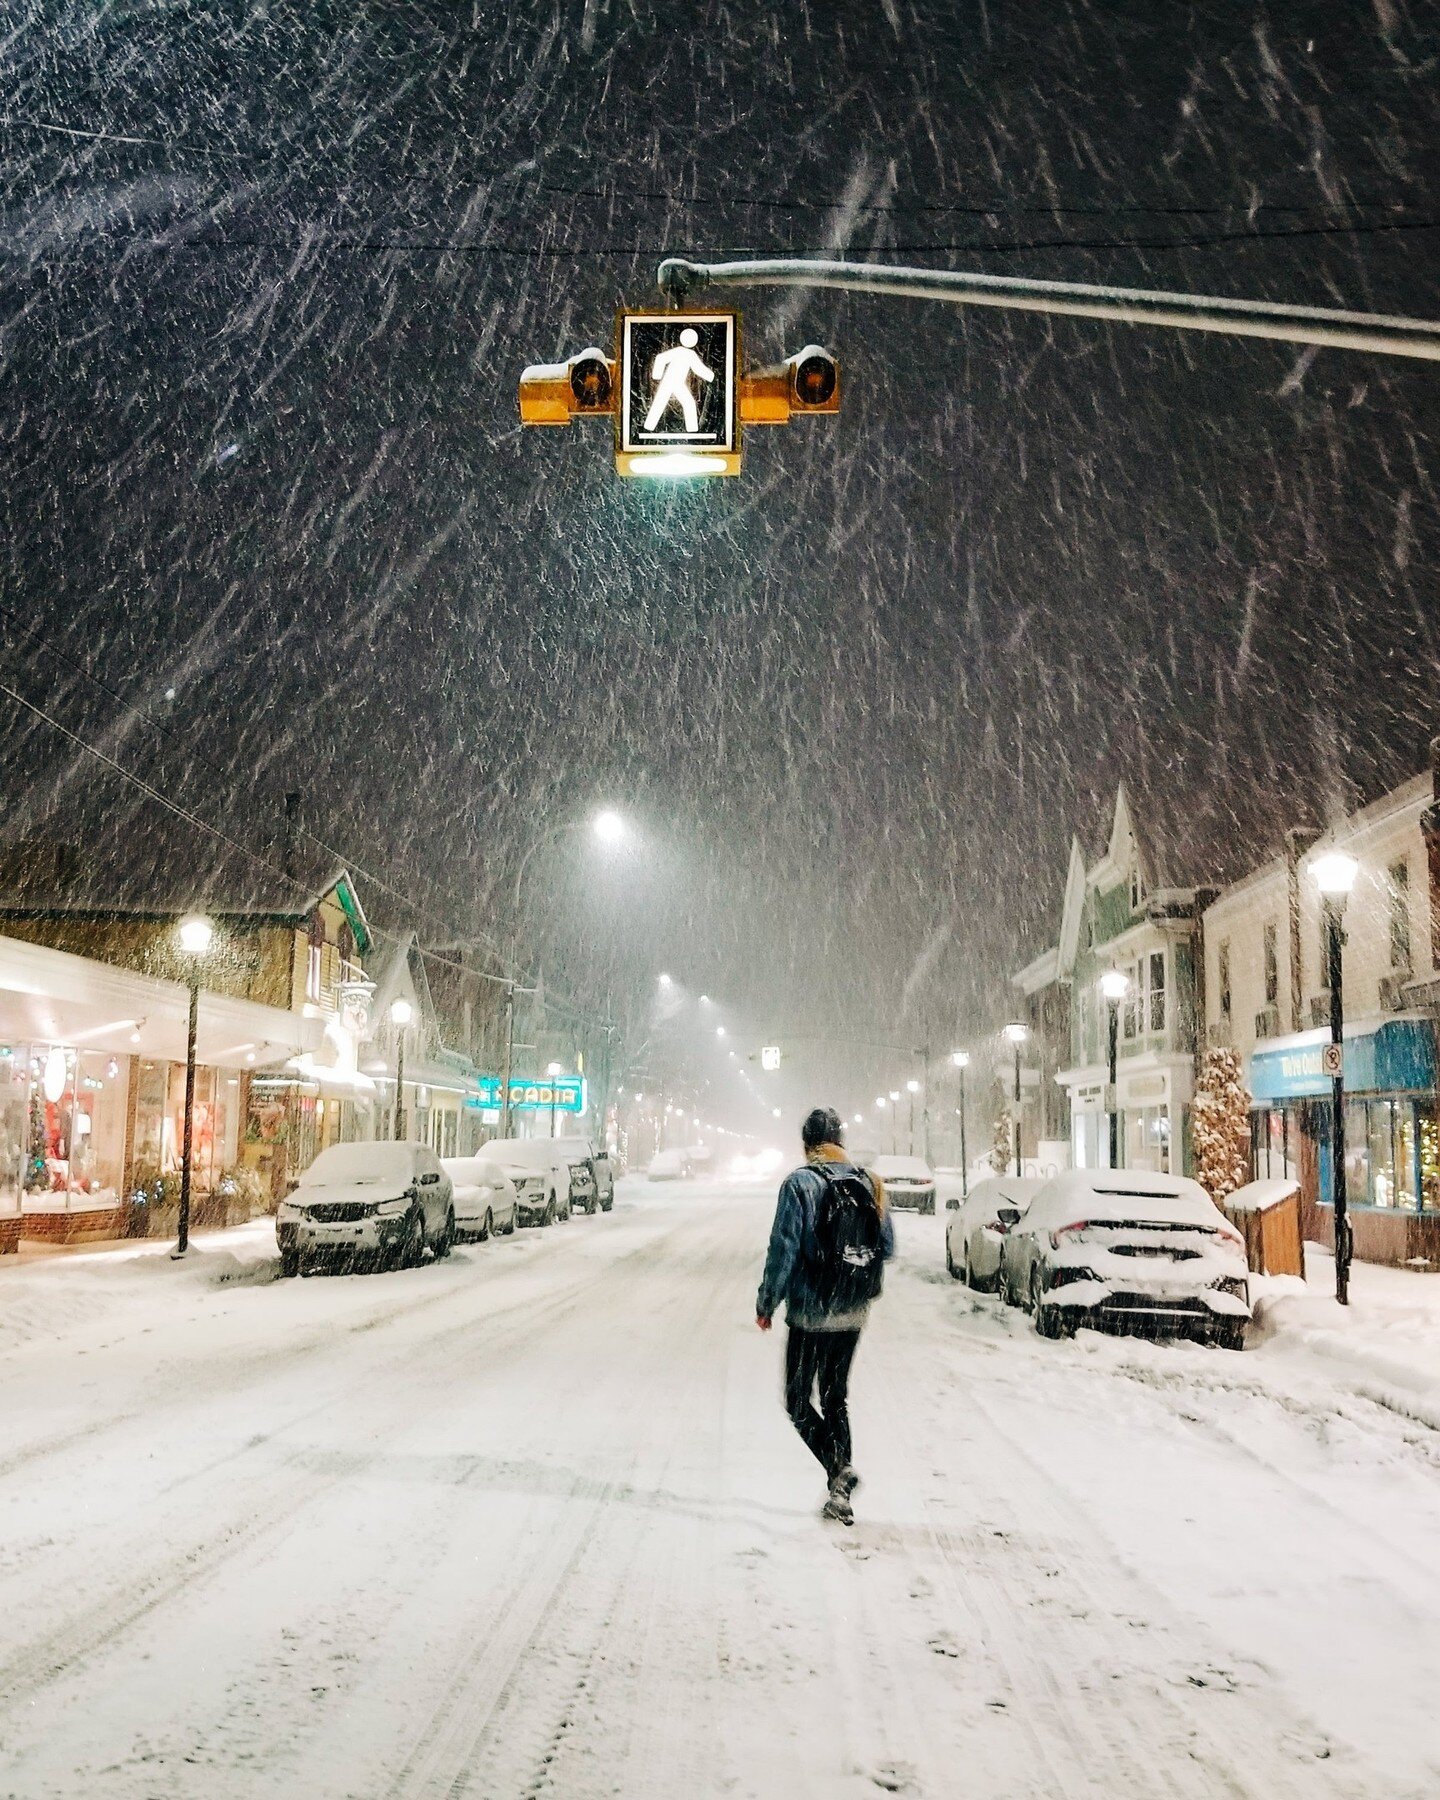 Throwback to a magical snowy night in Wolfville! ❄️ Who else is pumped for more snow this winter? ☃️⁠
⁠
#WhenInWolfville #WolfvilleNS #WinterWonderland #DiscoverNS